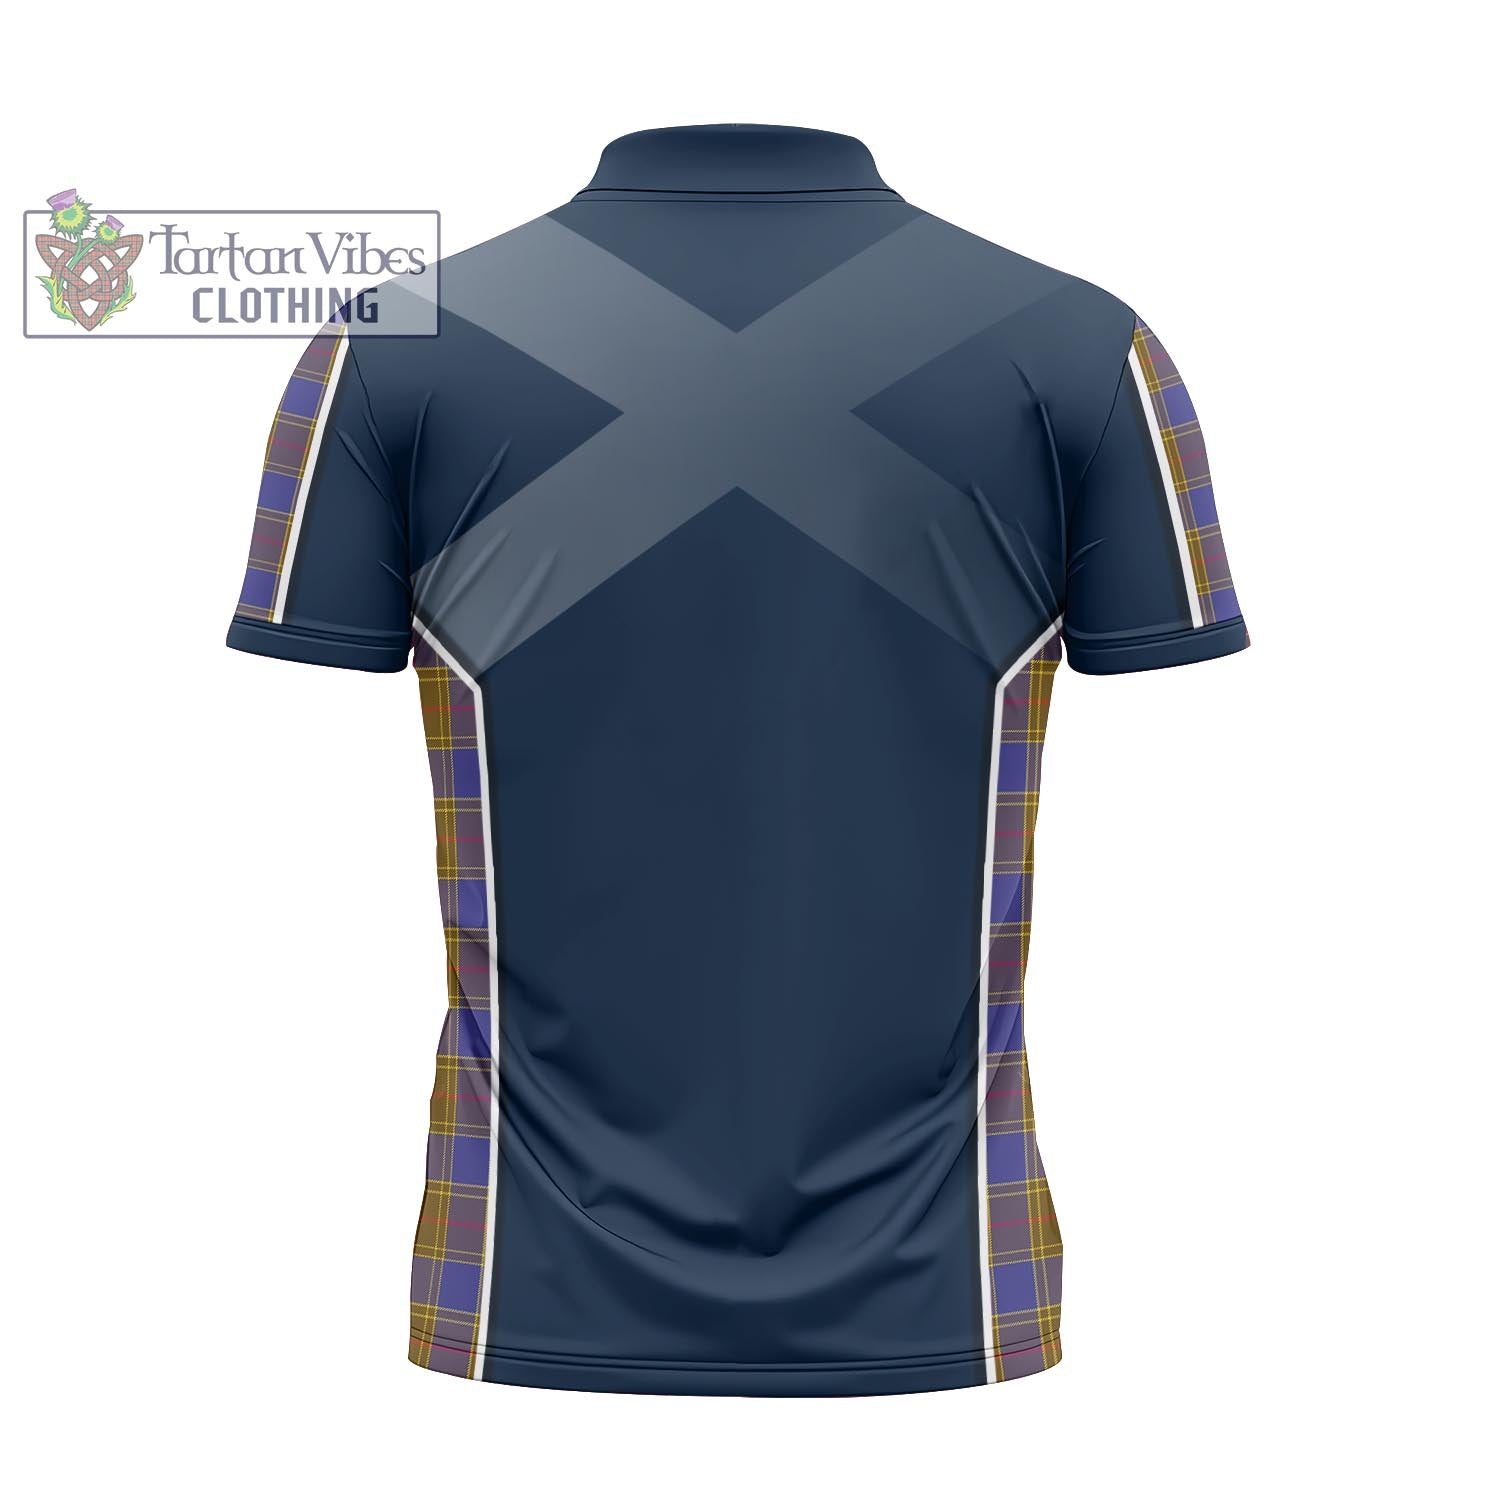 Tartan Vibes Clothing Balfour Modern Tartan Zipper Polo Shirt with Family Crest and Lion Rampant Vibes Sport Style